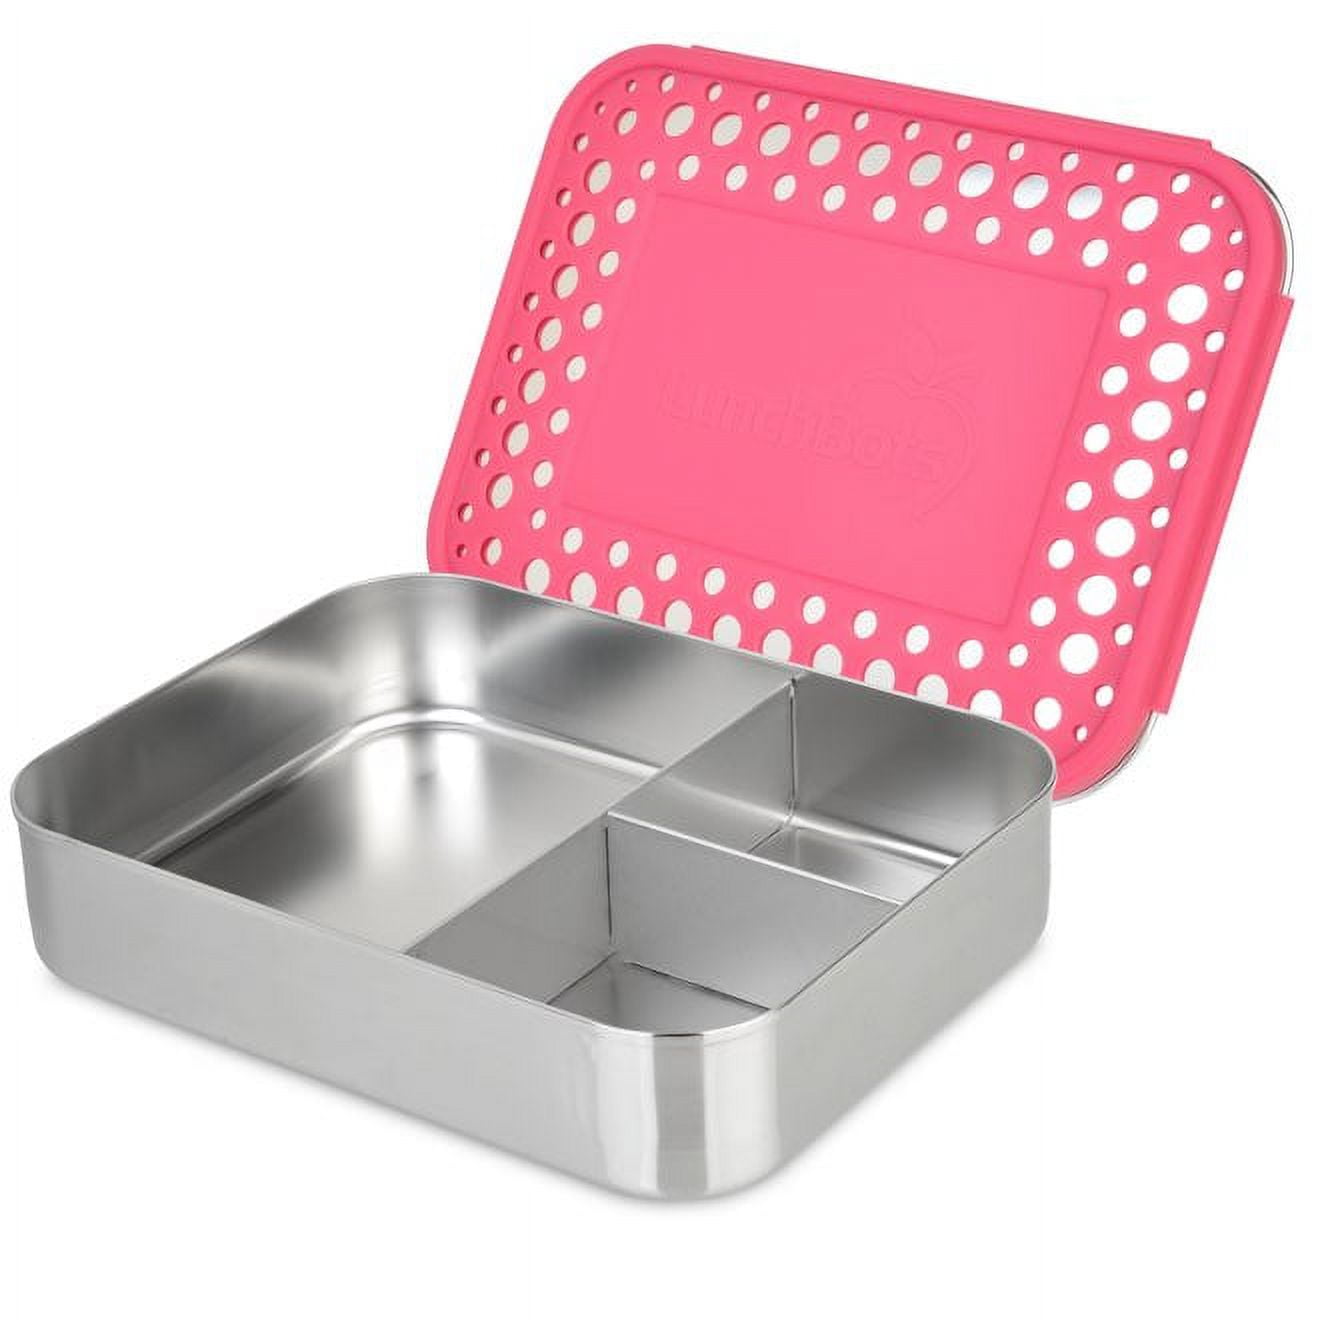 Easy Togo 3 Pack Pink Stainless Steel Lunch Containers with Lids Anti-Slip  Silicone Base, Bento Box …See more Easy Togo 3 Pack Pink Stainless Steel